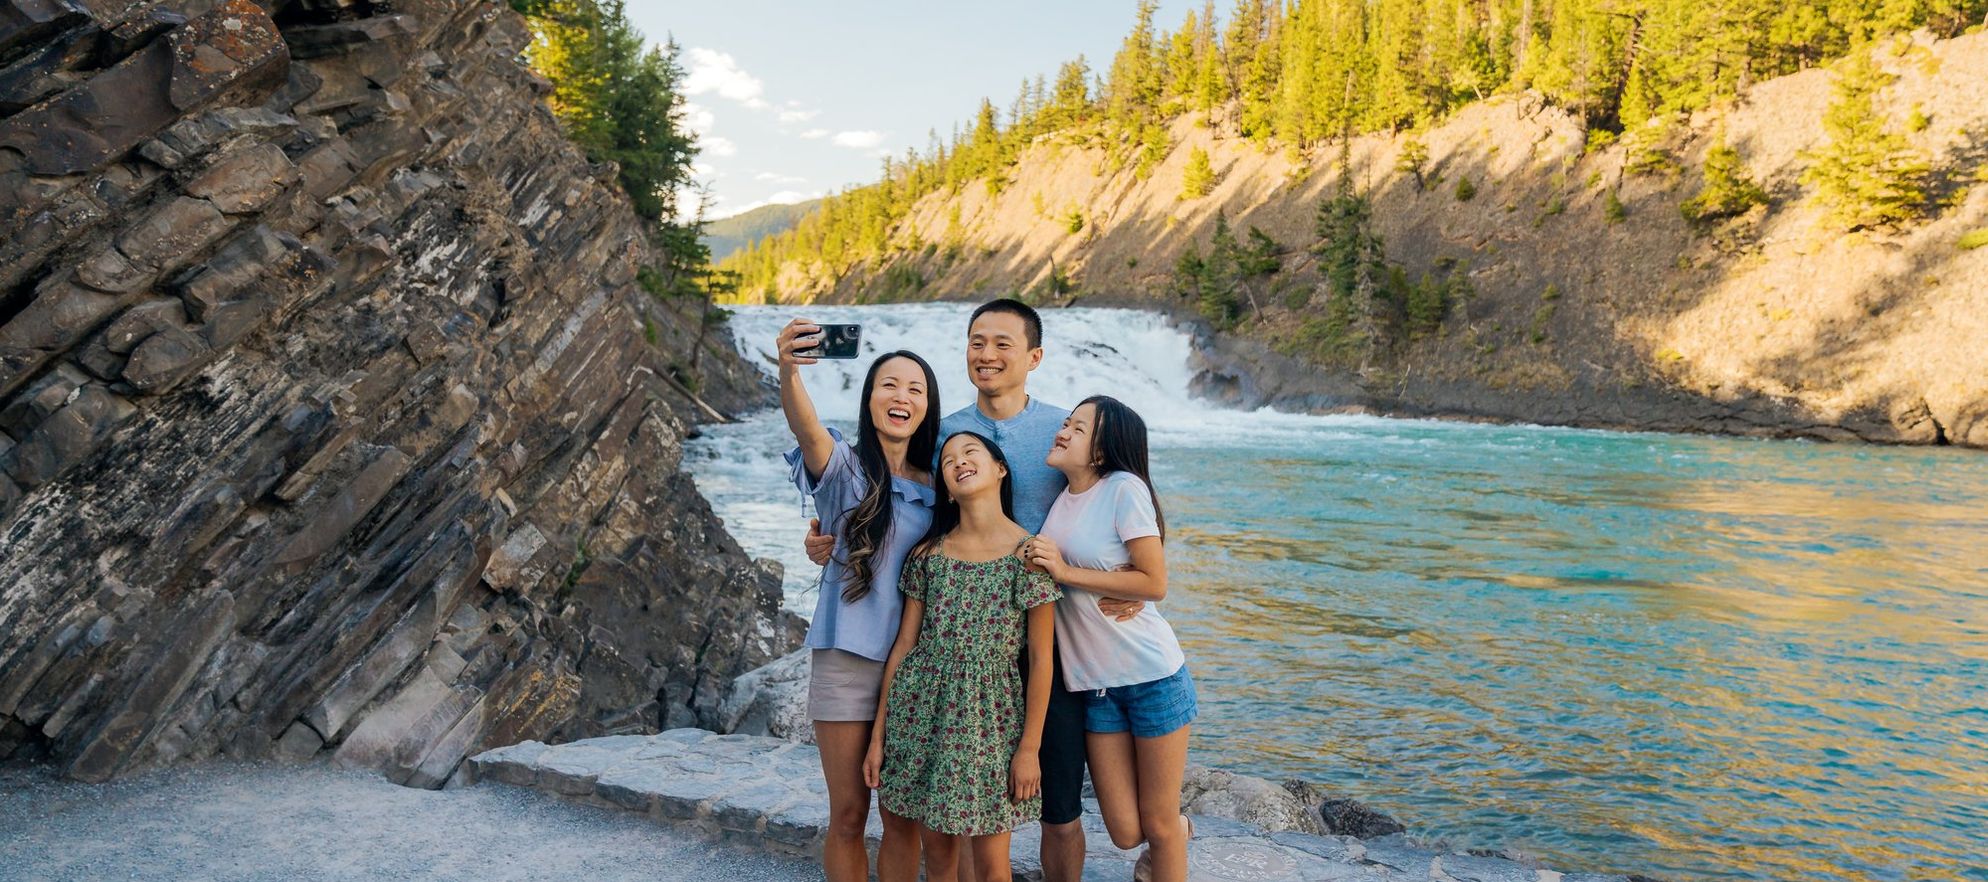 A family of four take a selfie in front of a small waterfall on a sunny summer day